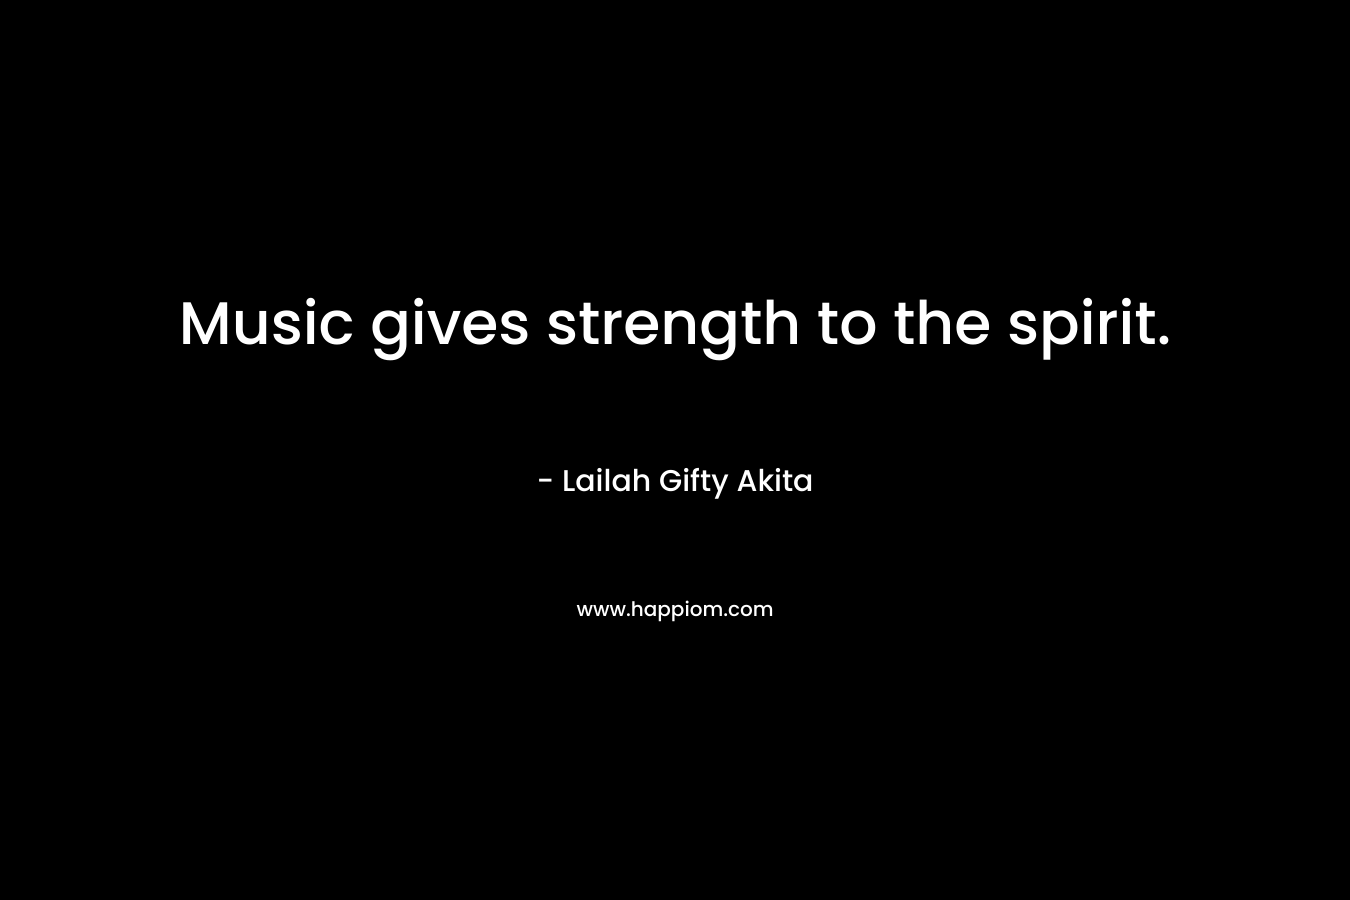 Music gives strength to the spirit.